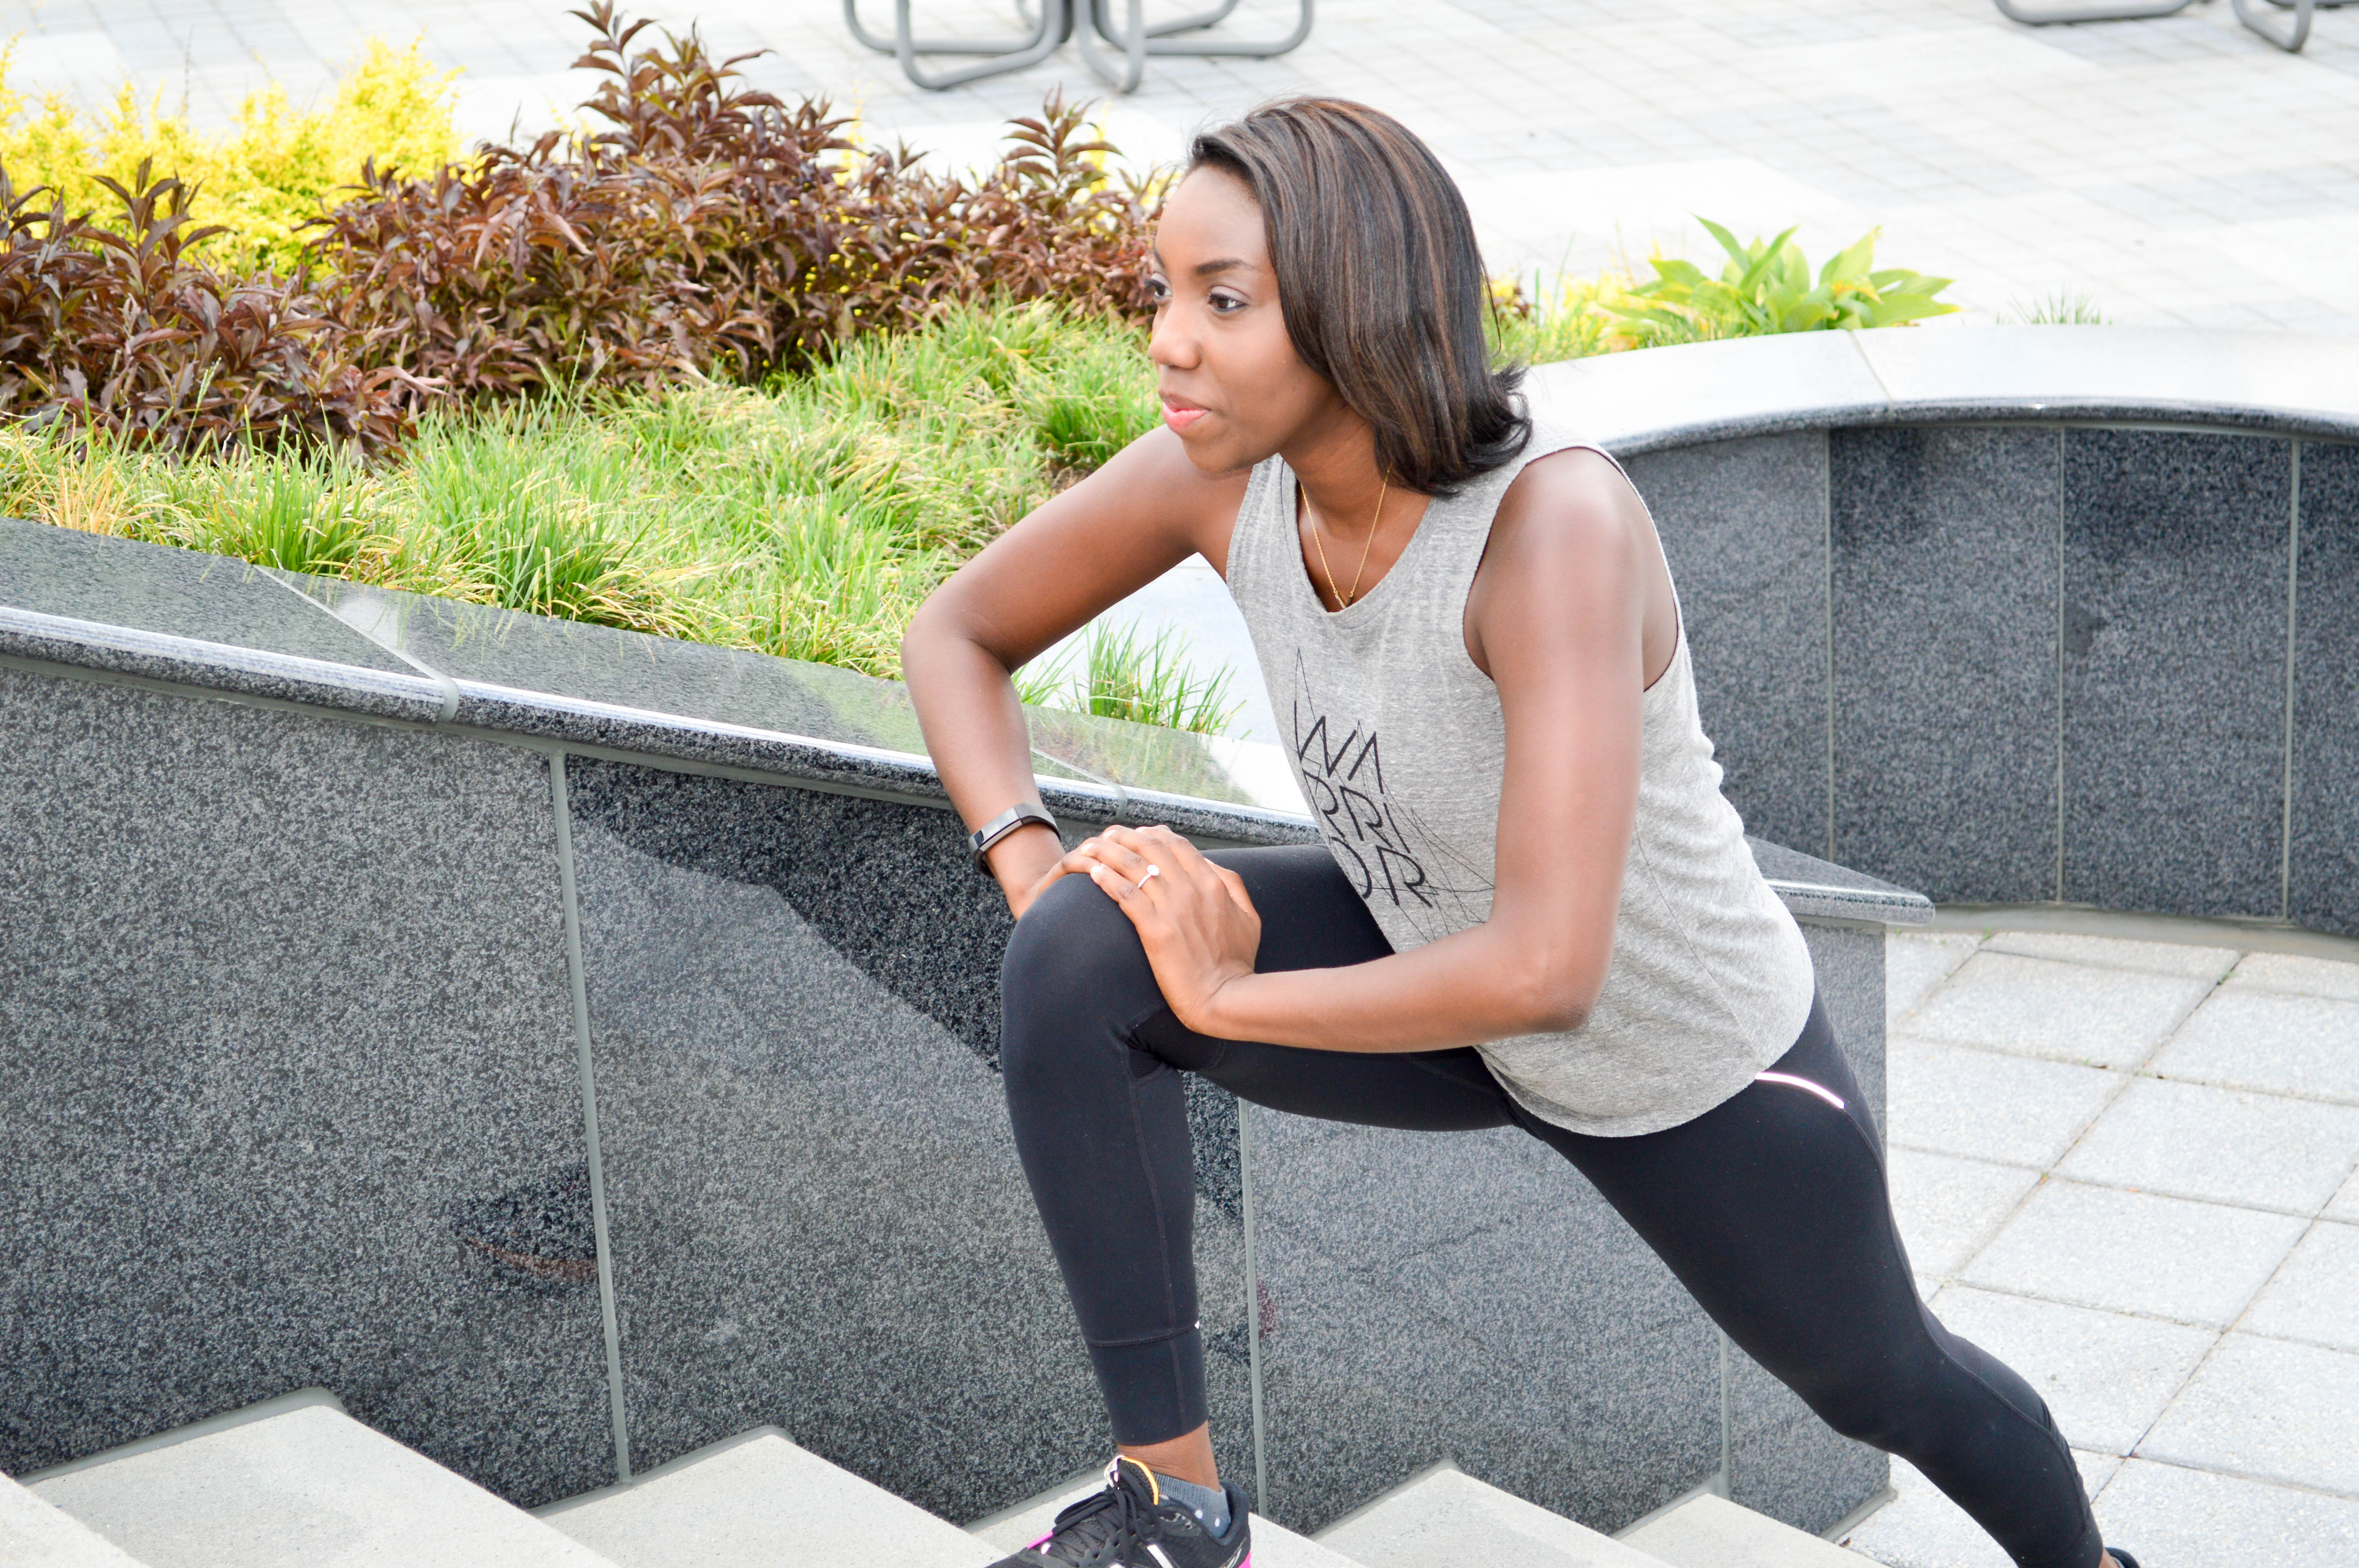 6 Post Run Stretches Every Runner Should Do